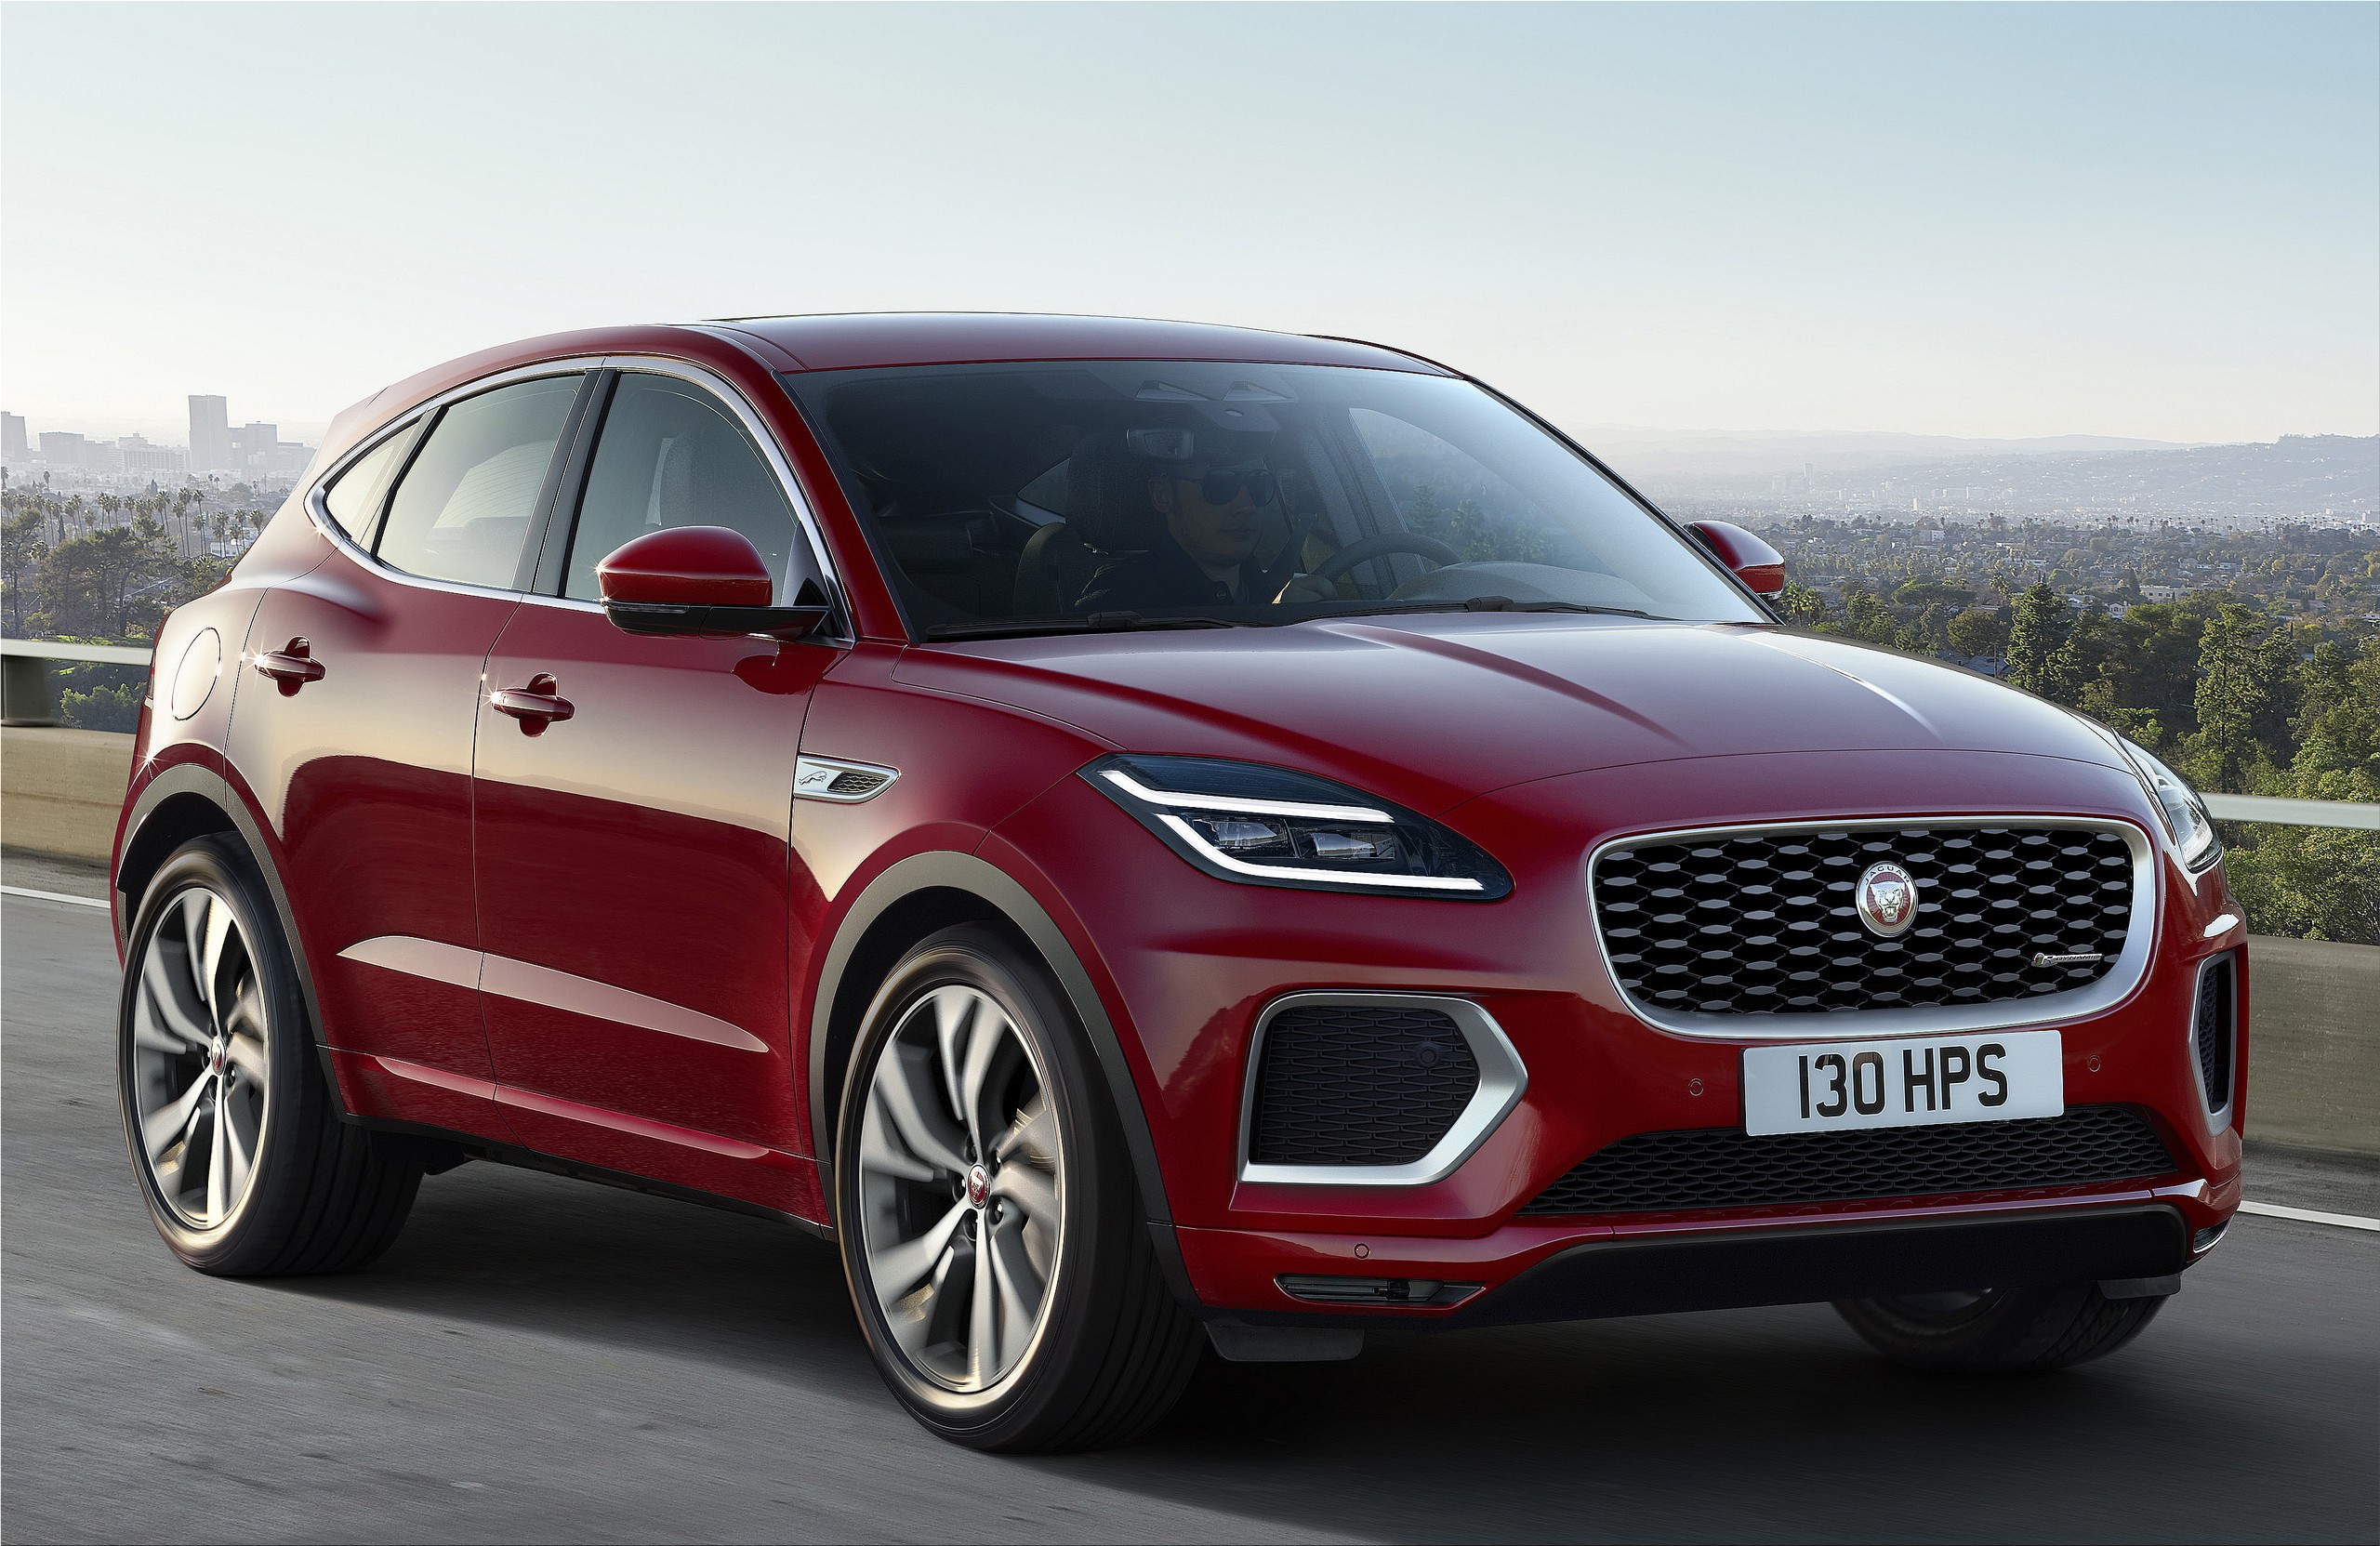 The new Jaguar E-Pace with a plug-in hybrid powertrain | Dosula